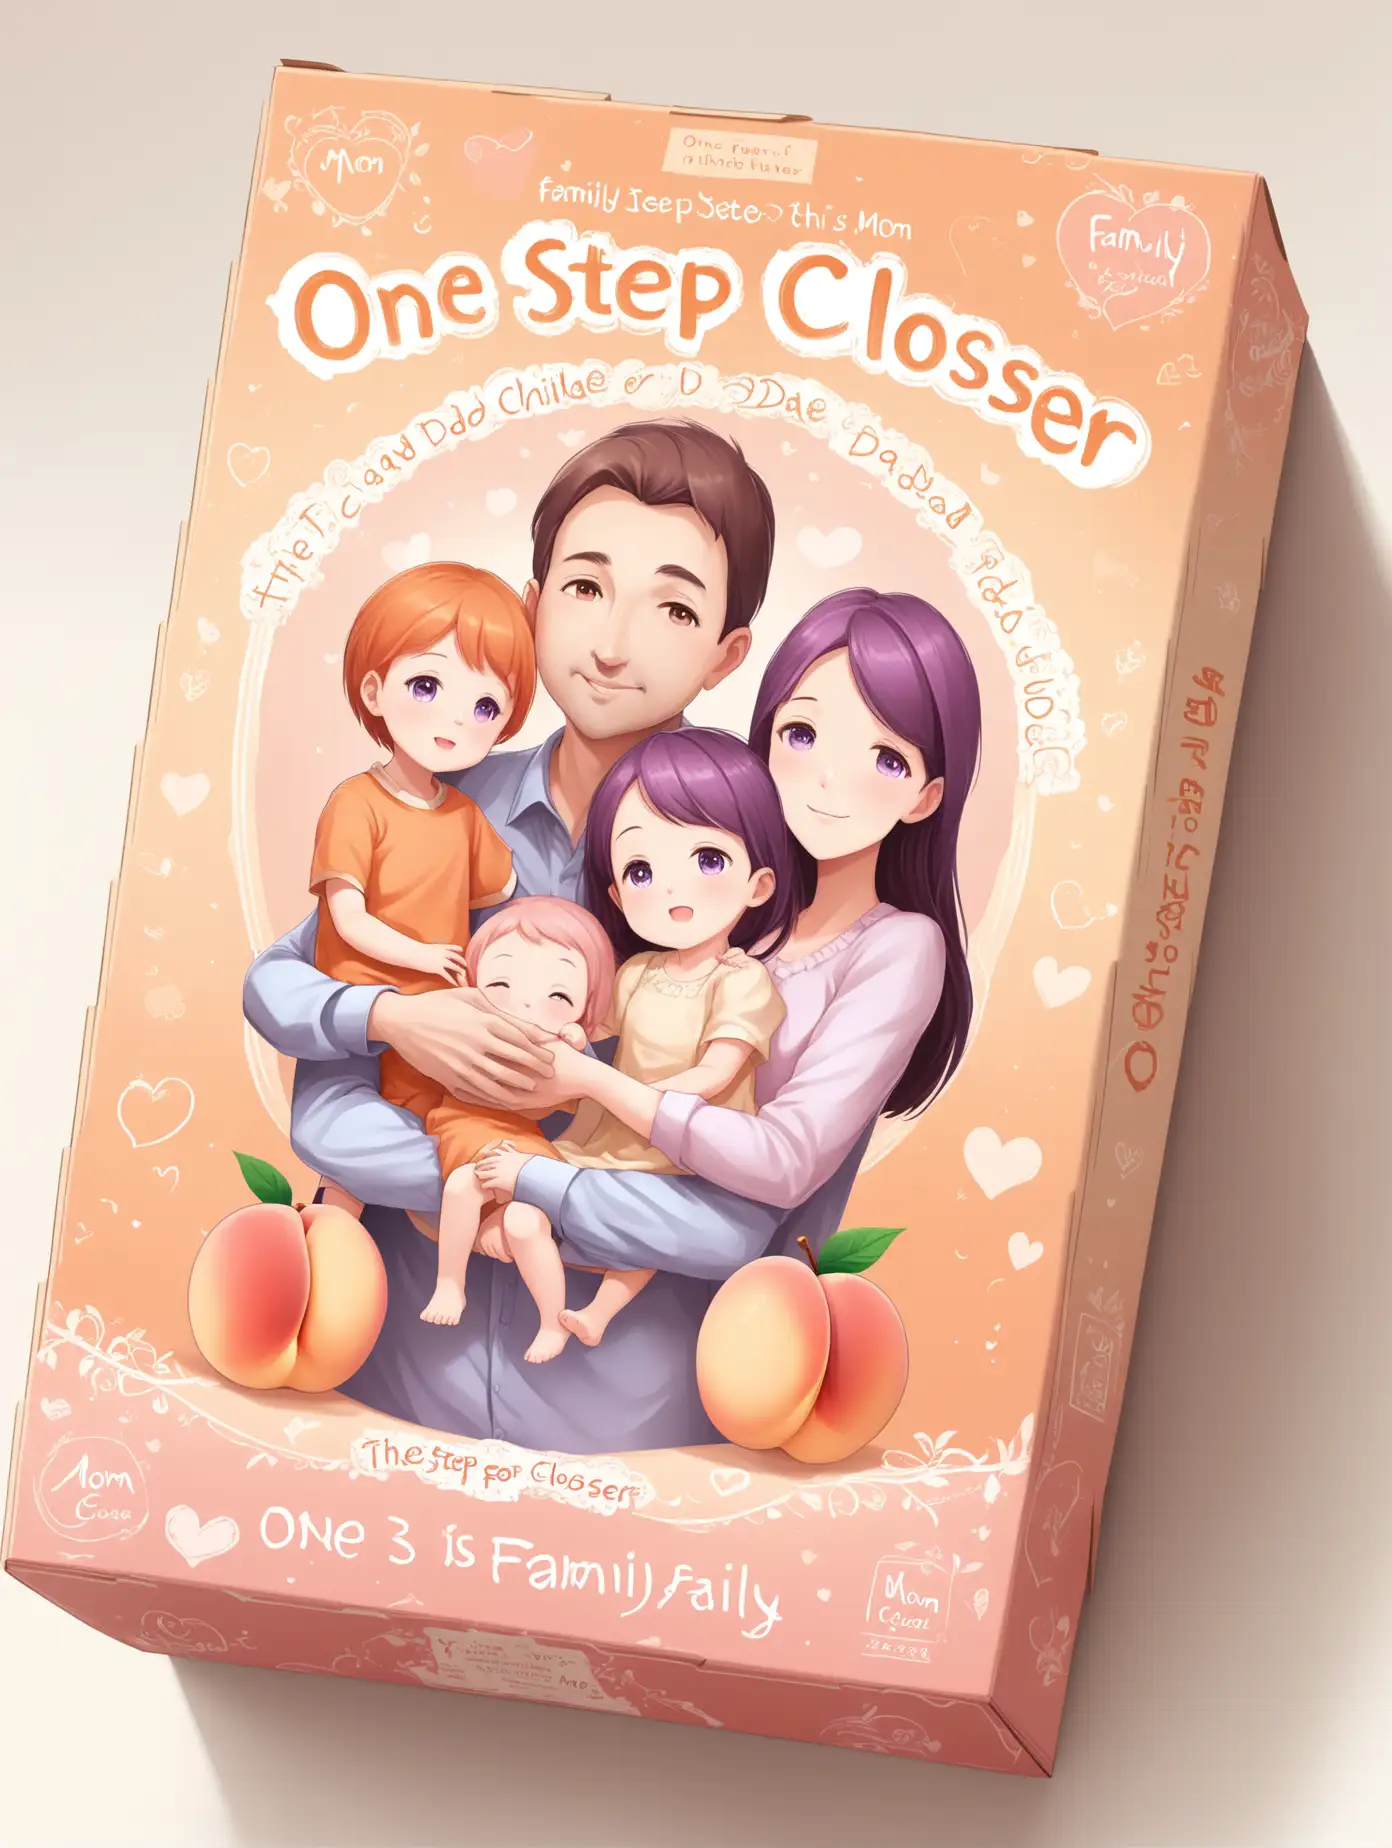 Family-Hugging-in-Delicate-Tones-One-Step-Closer-Board-Game-Packaging